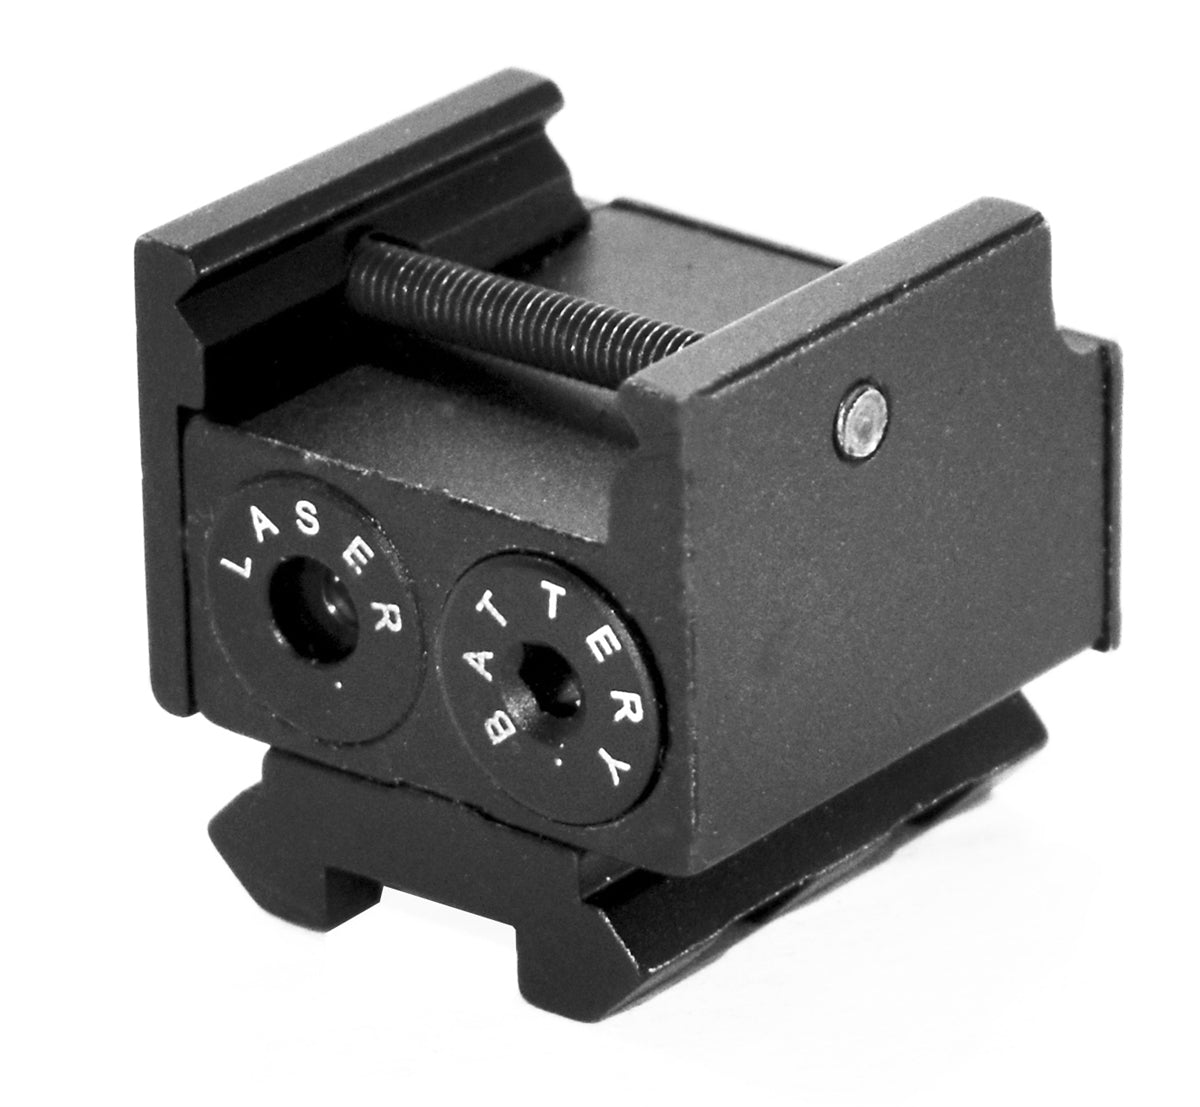 Trinity Compact Red Pistol Laser Sight For M&P® 380 Shield Smith and Wesson sd9 Handguns. - TRINITY SUPPLY INC